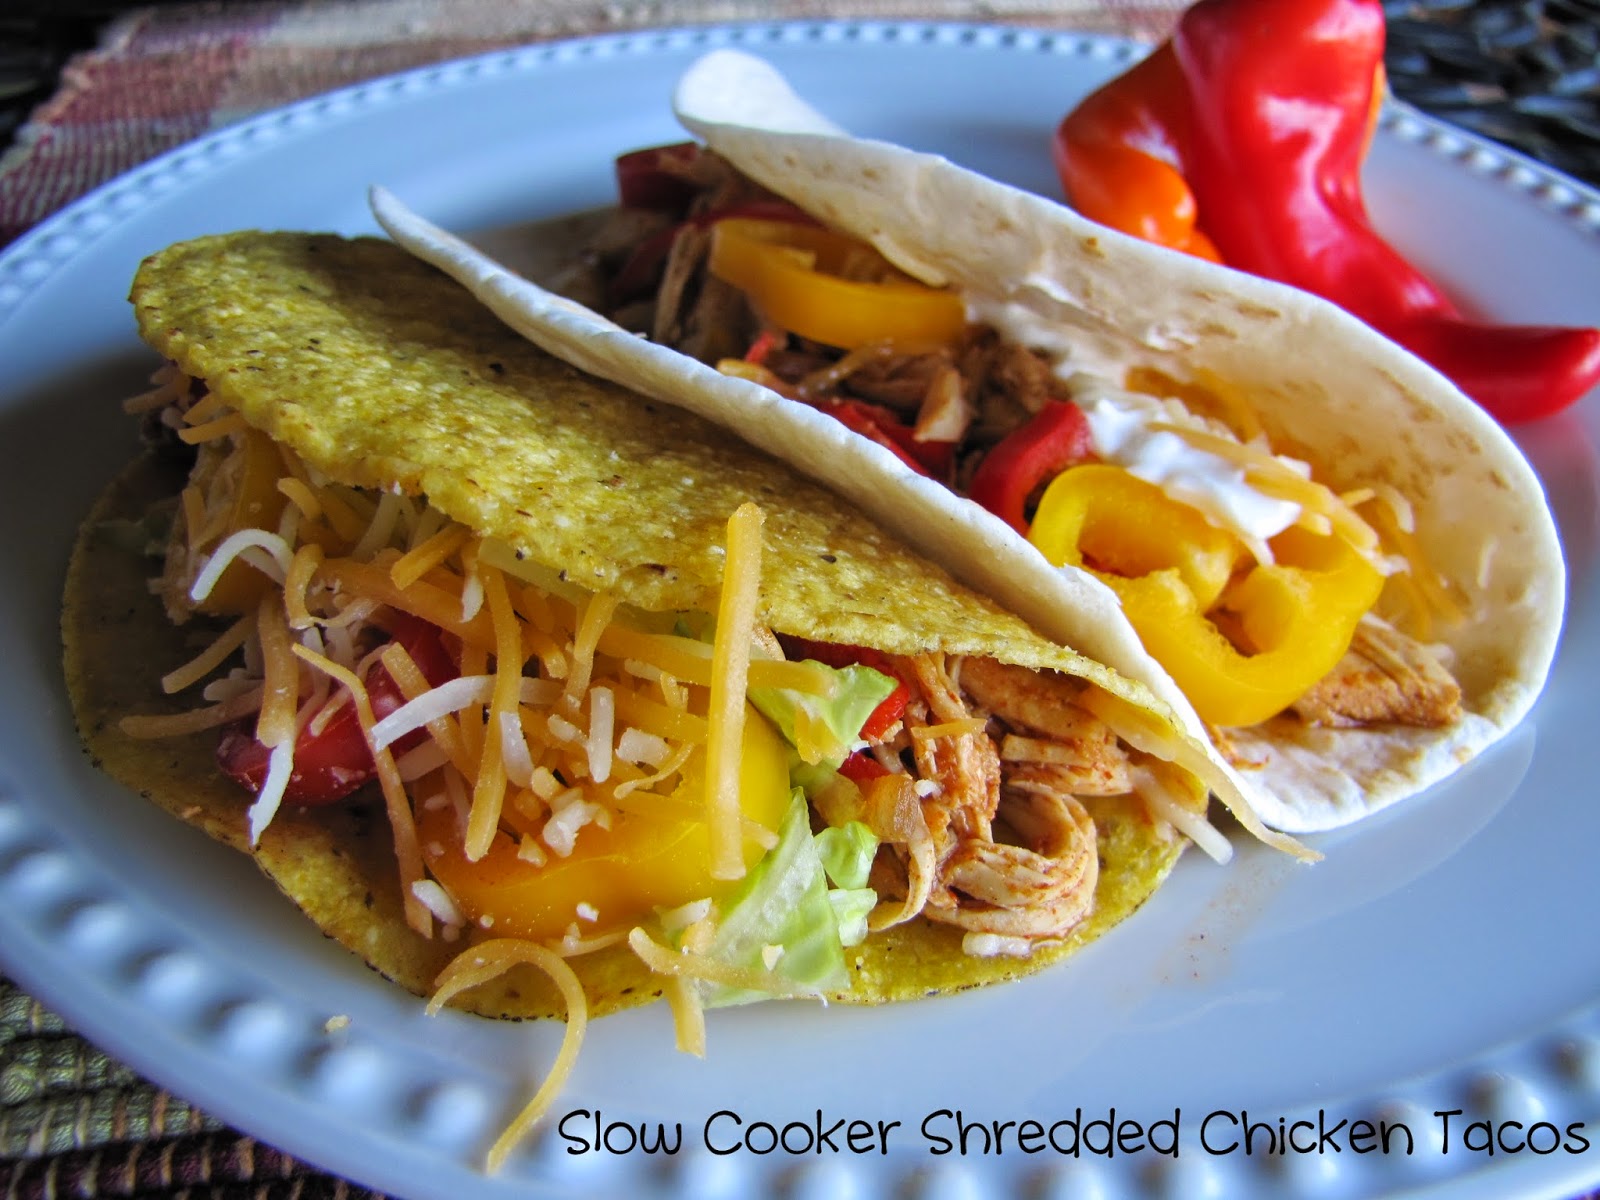 Big Mama's Home Kitchen: Slow Cooker Shredded Chicken Tacos